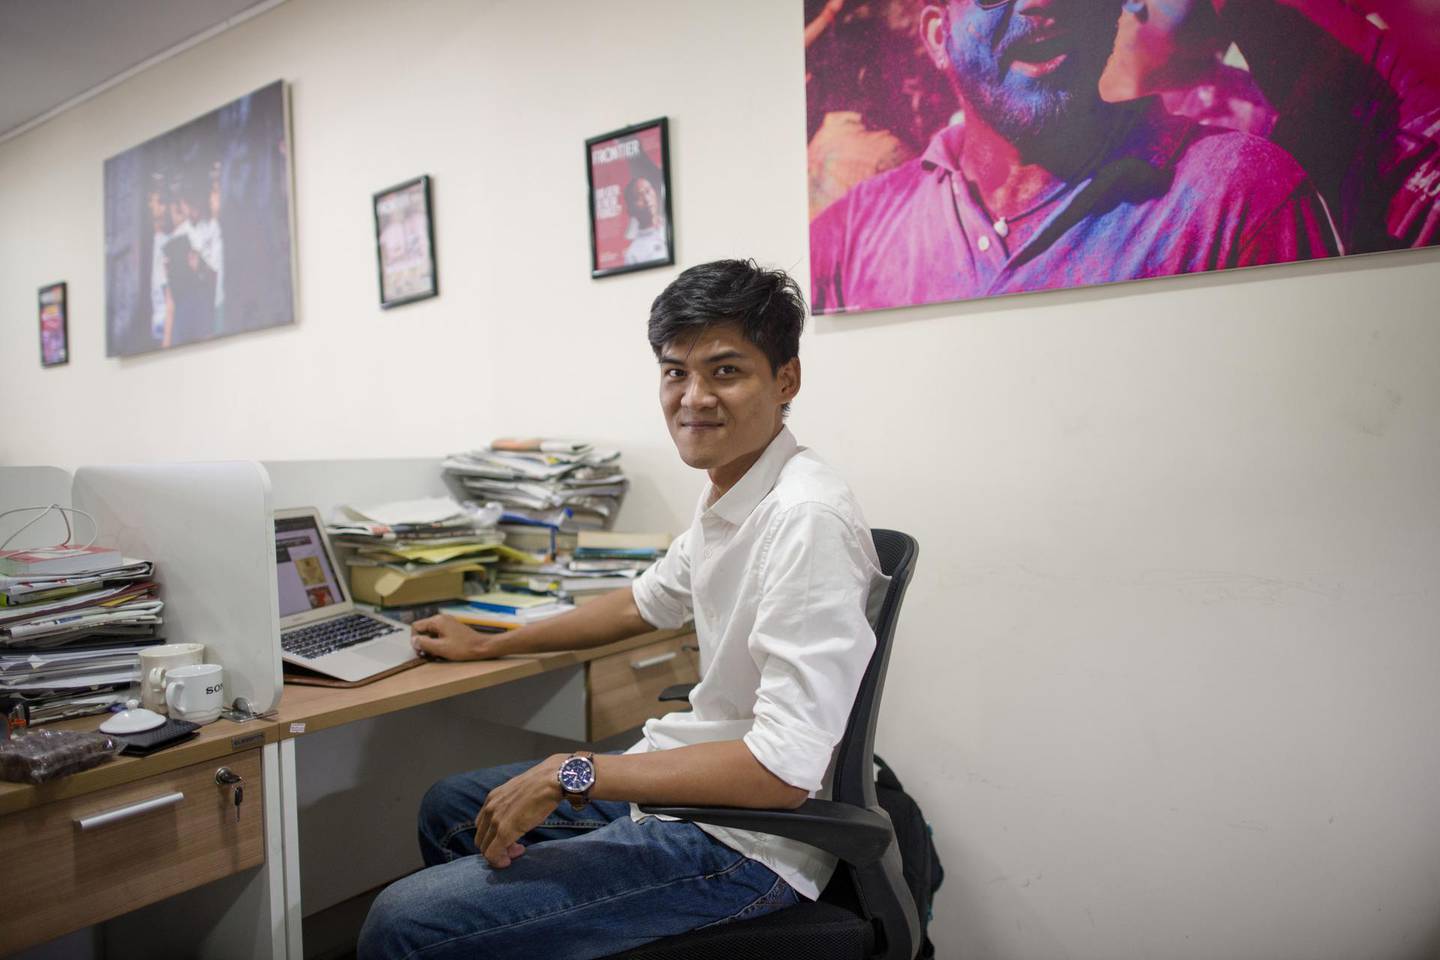 This photo taken on December 18, 2017 shows Myanmar reporter Mratt Kyaw Thu posing at his office in Yangon.
Mratt Kyaw Thu, 27, has won the 2017 Agence France-Presse Kate Webb prize for his compelling and sensitive coverage of ethnic strife in his native Myanmar, AFP announced on December 19. / AFP PHOTO / YE AUNG THU